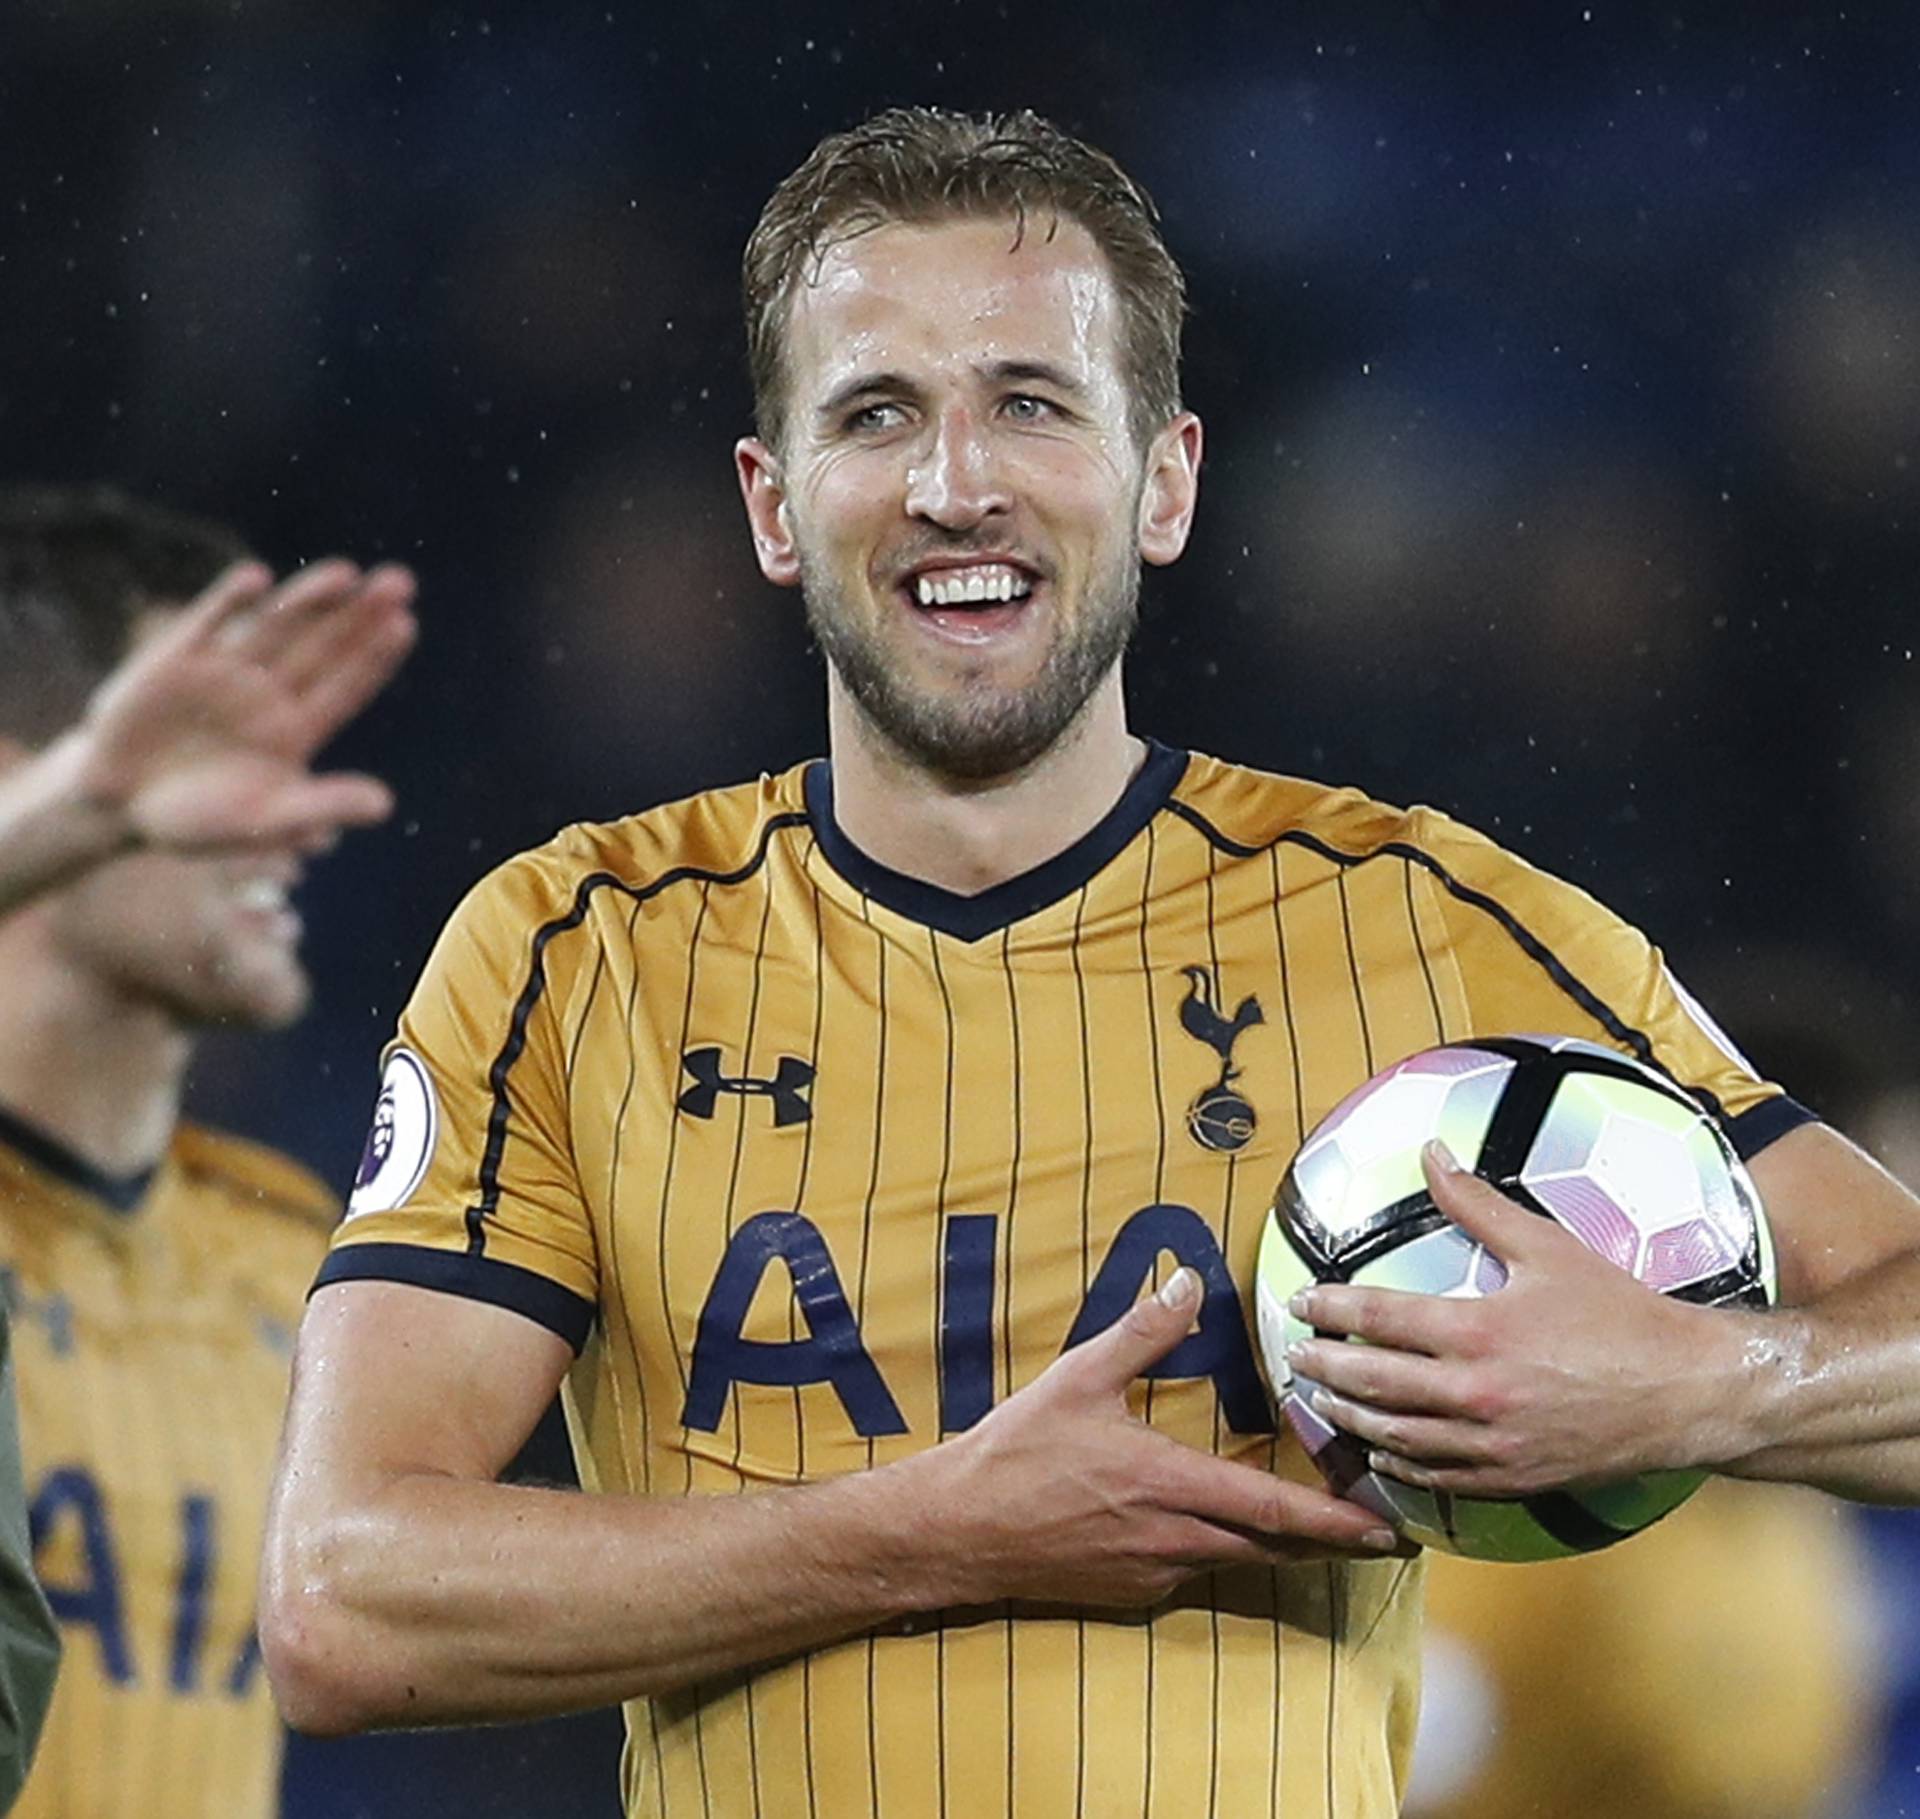 Tottenham's Harry Kane holds the match ball as he celebrates after the match